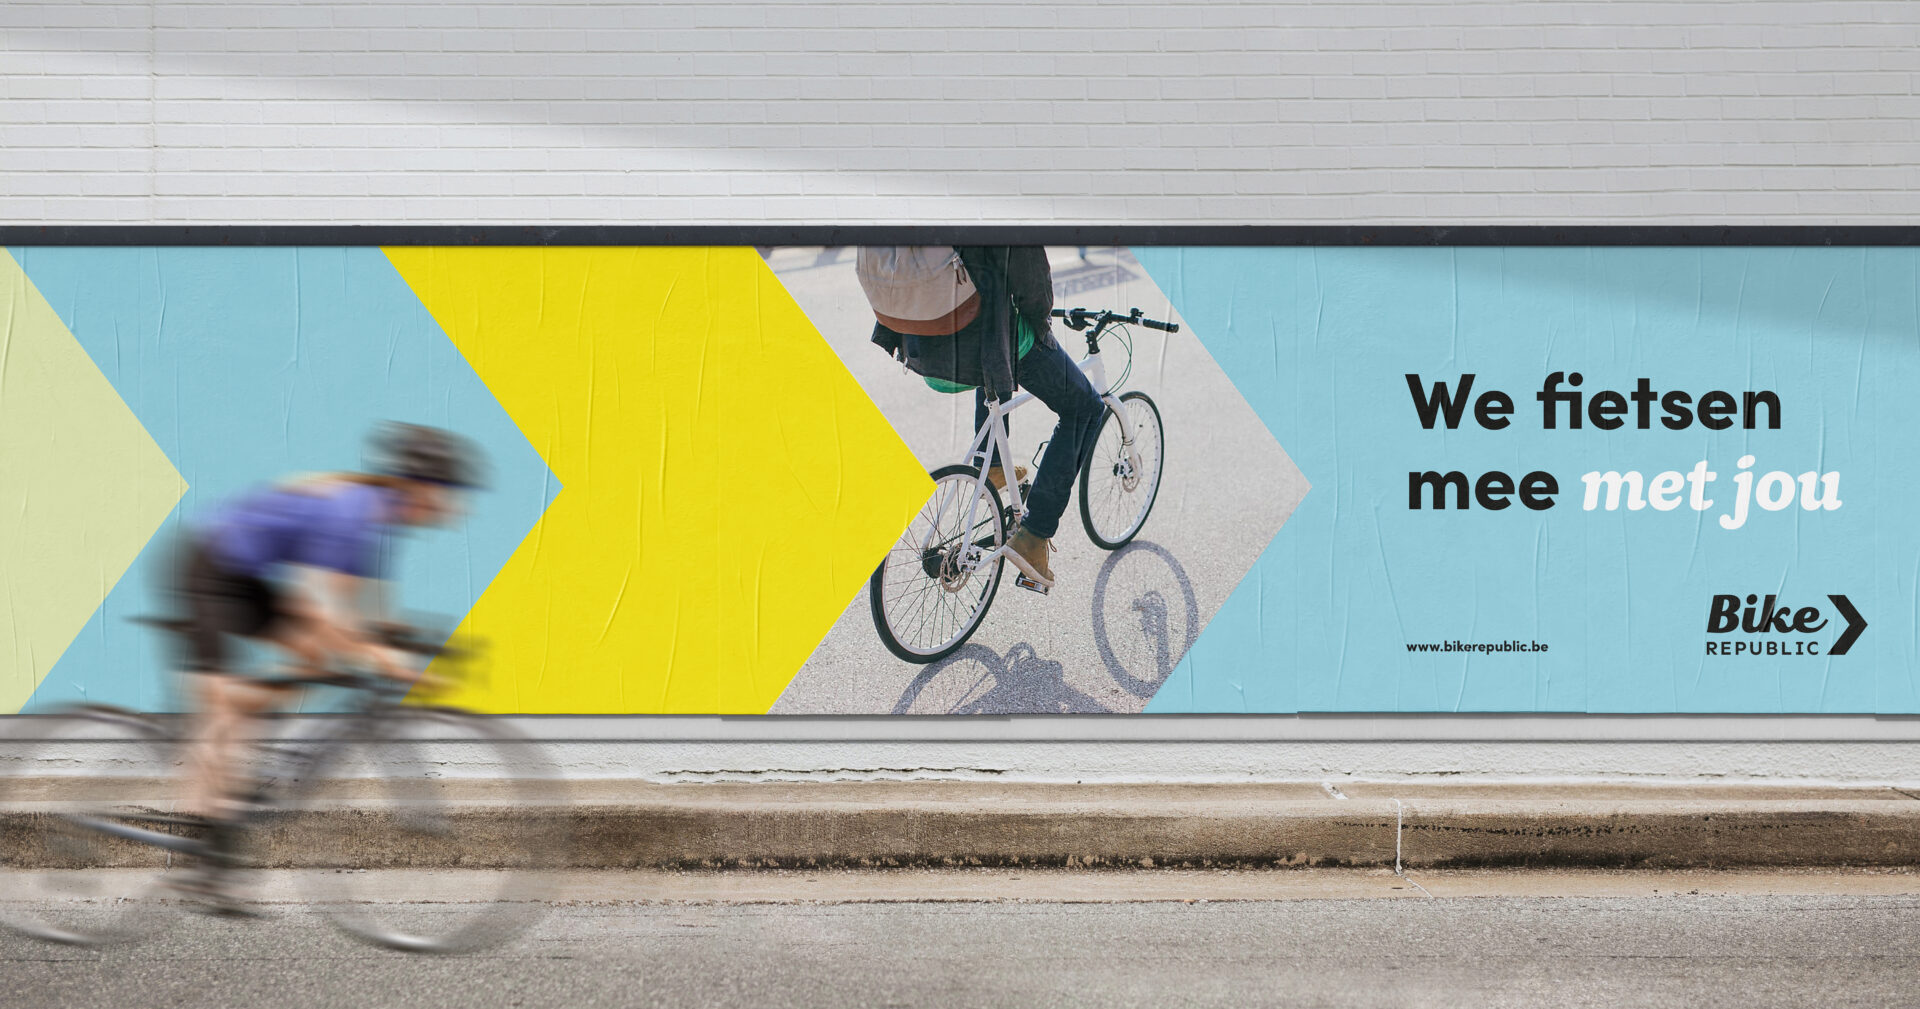 Horizontal posters in the streets with a bicycle and a baseline, serving as a marketing campaign.